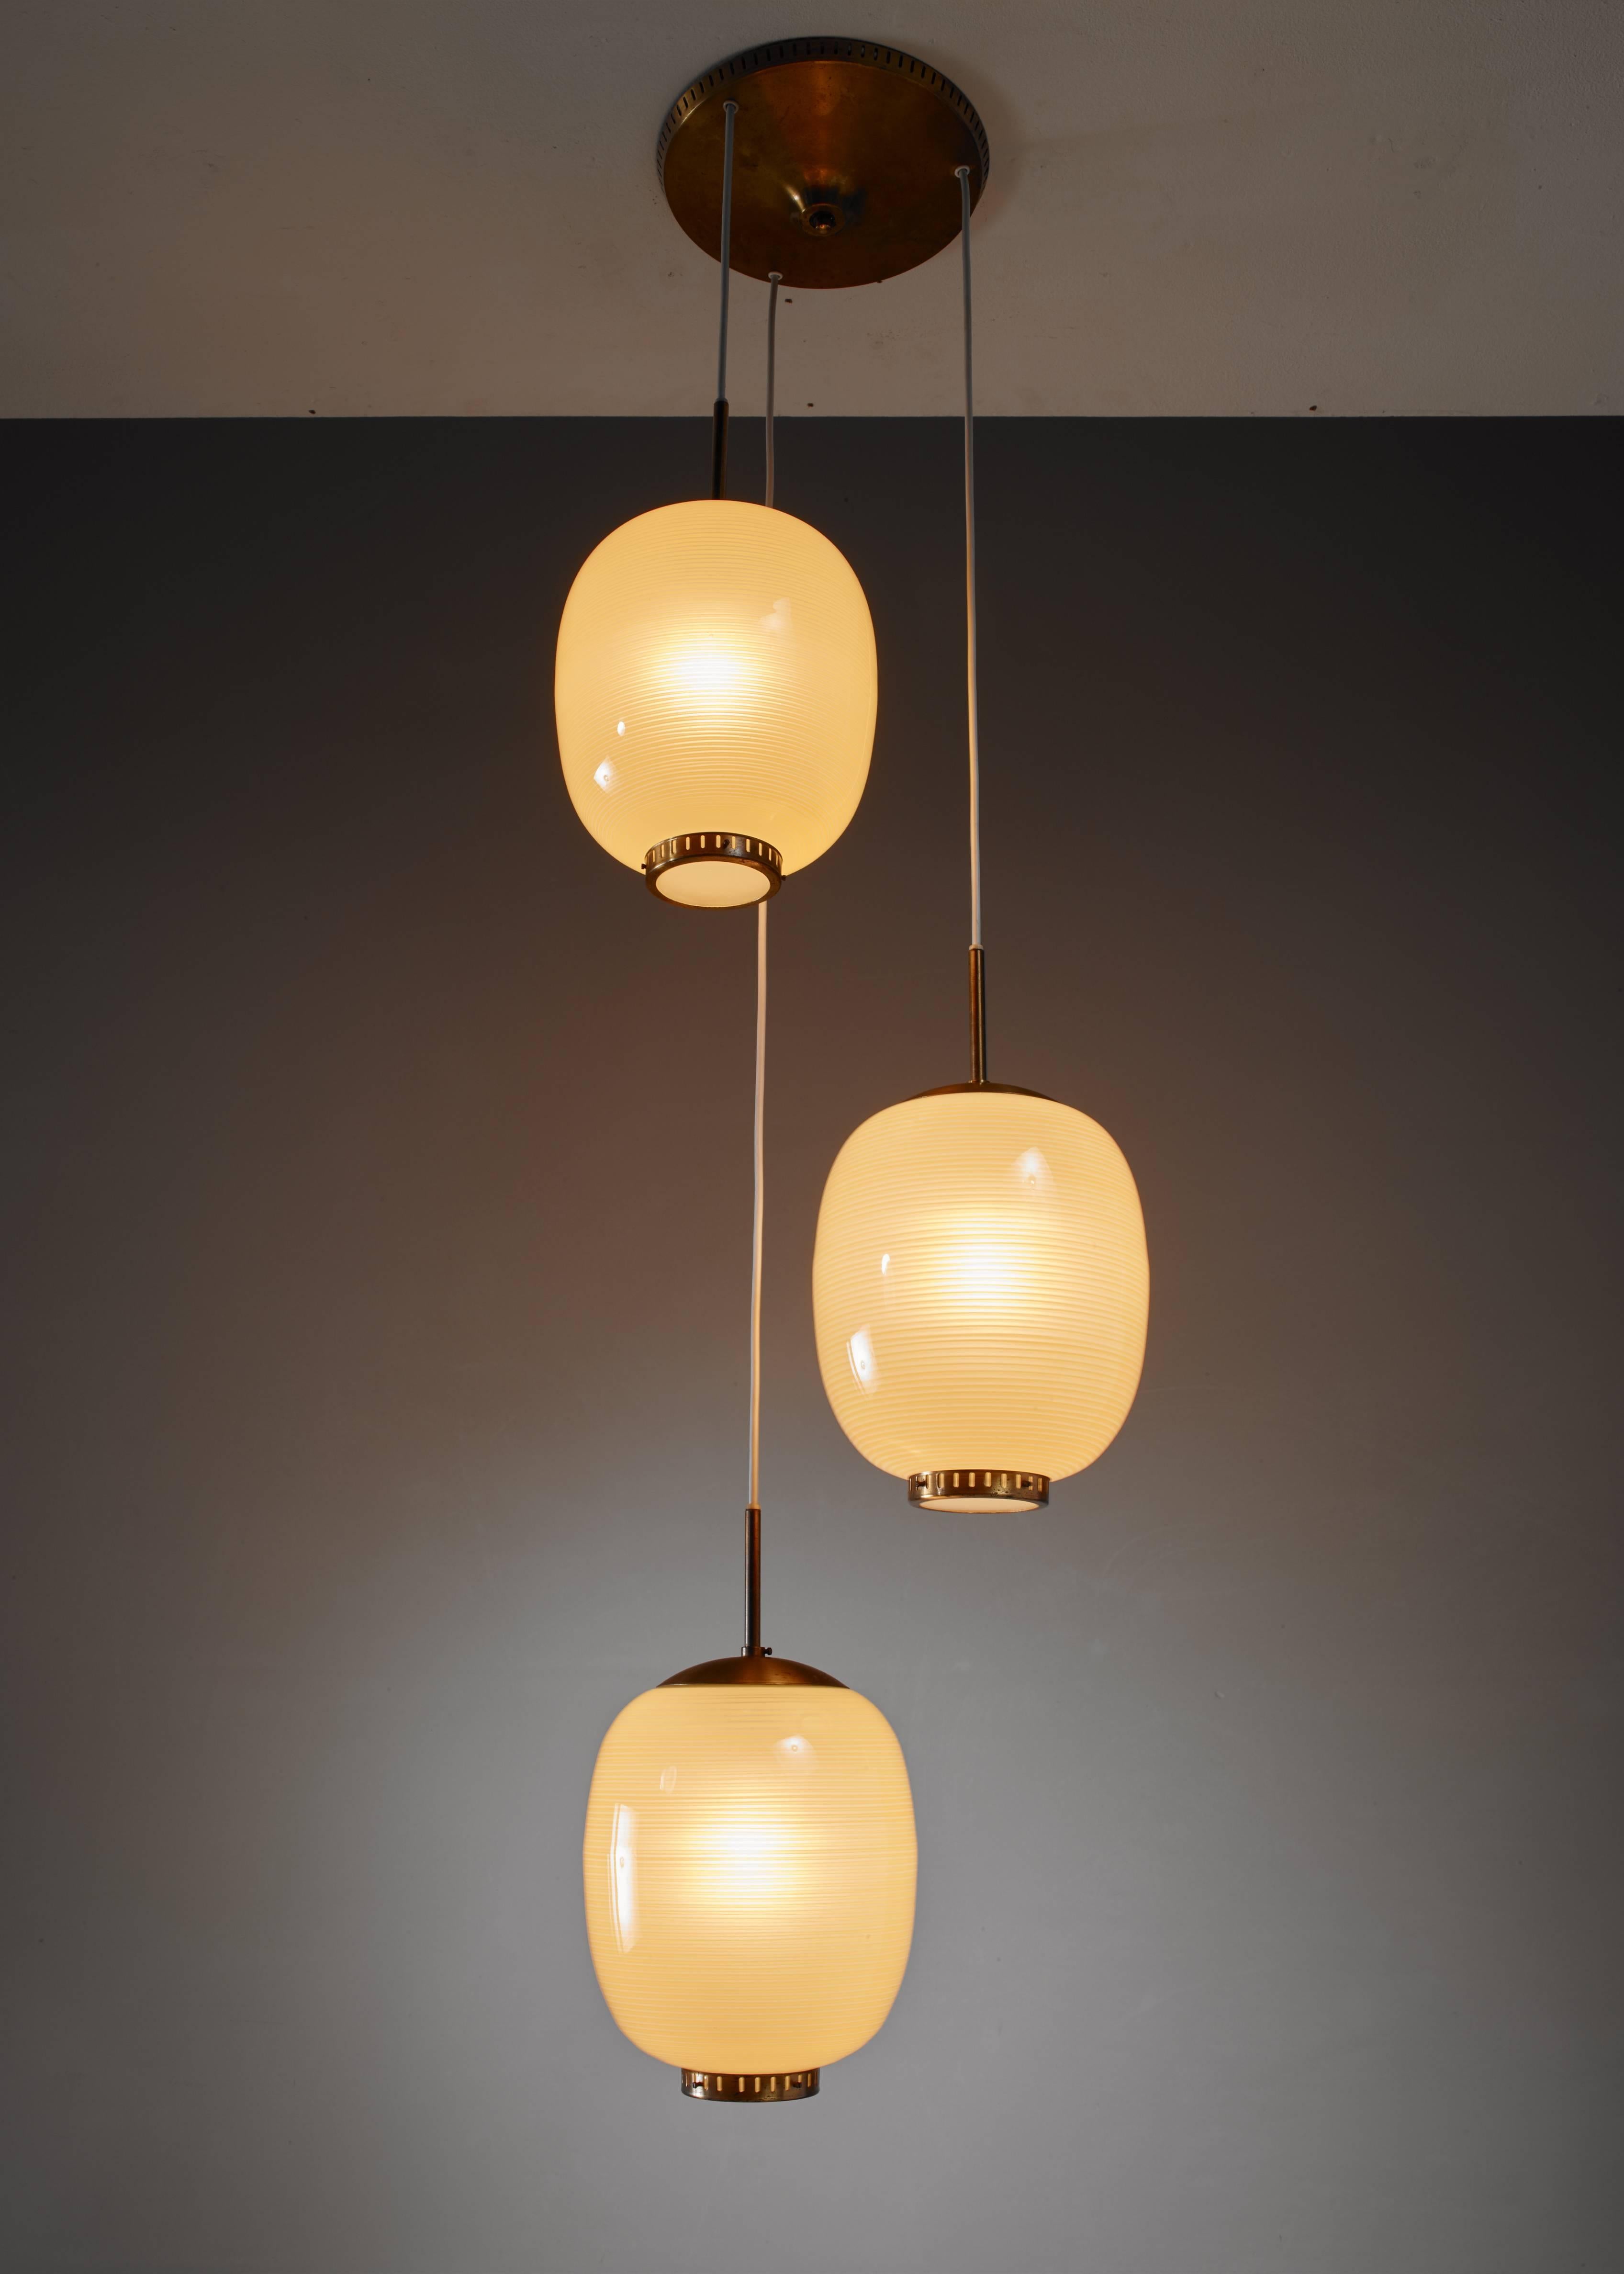 A chandelier with three pendant lamps by Danish designer Bent Karlby. The lamps are made of yellow glass with a striped pattern and hang from a brass canopy. The lamps have a brass ring with a frosted glass diffuser underneath.
The measurements